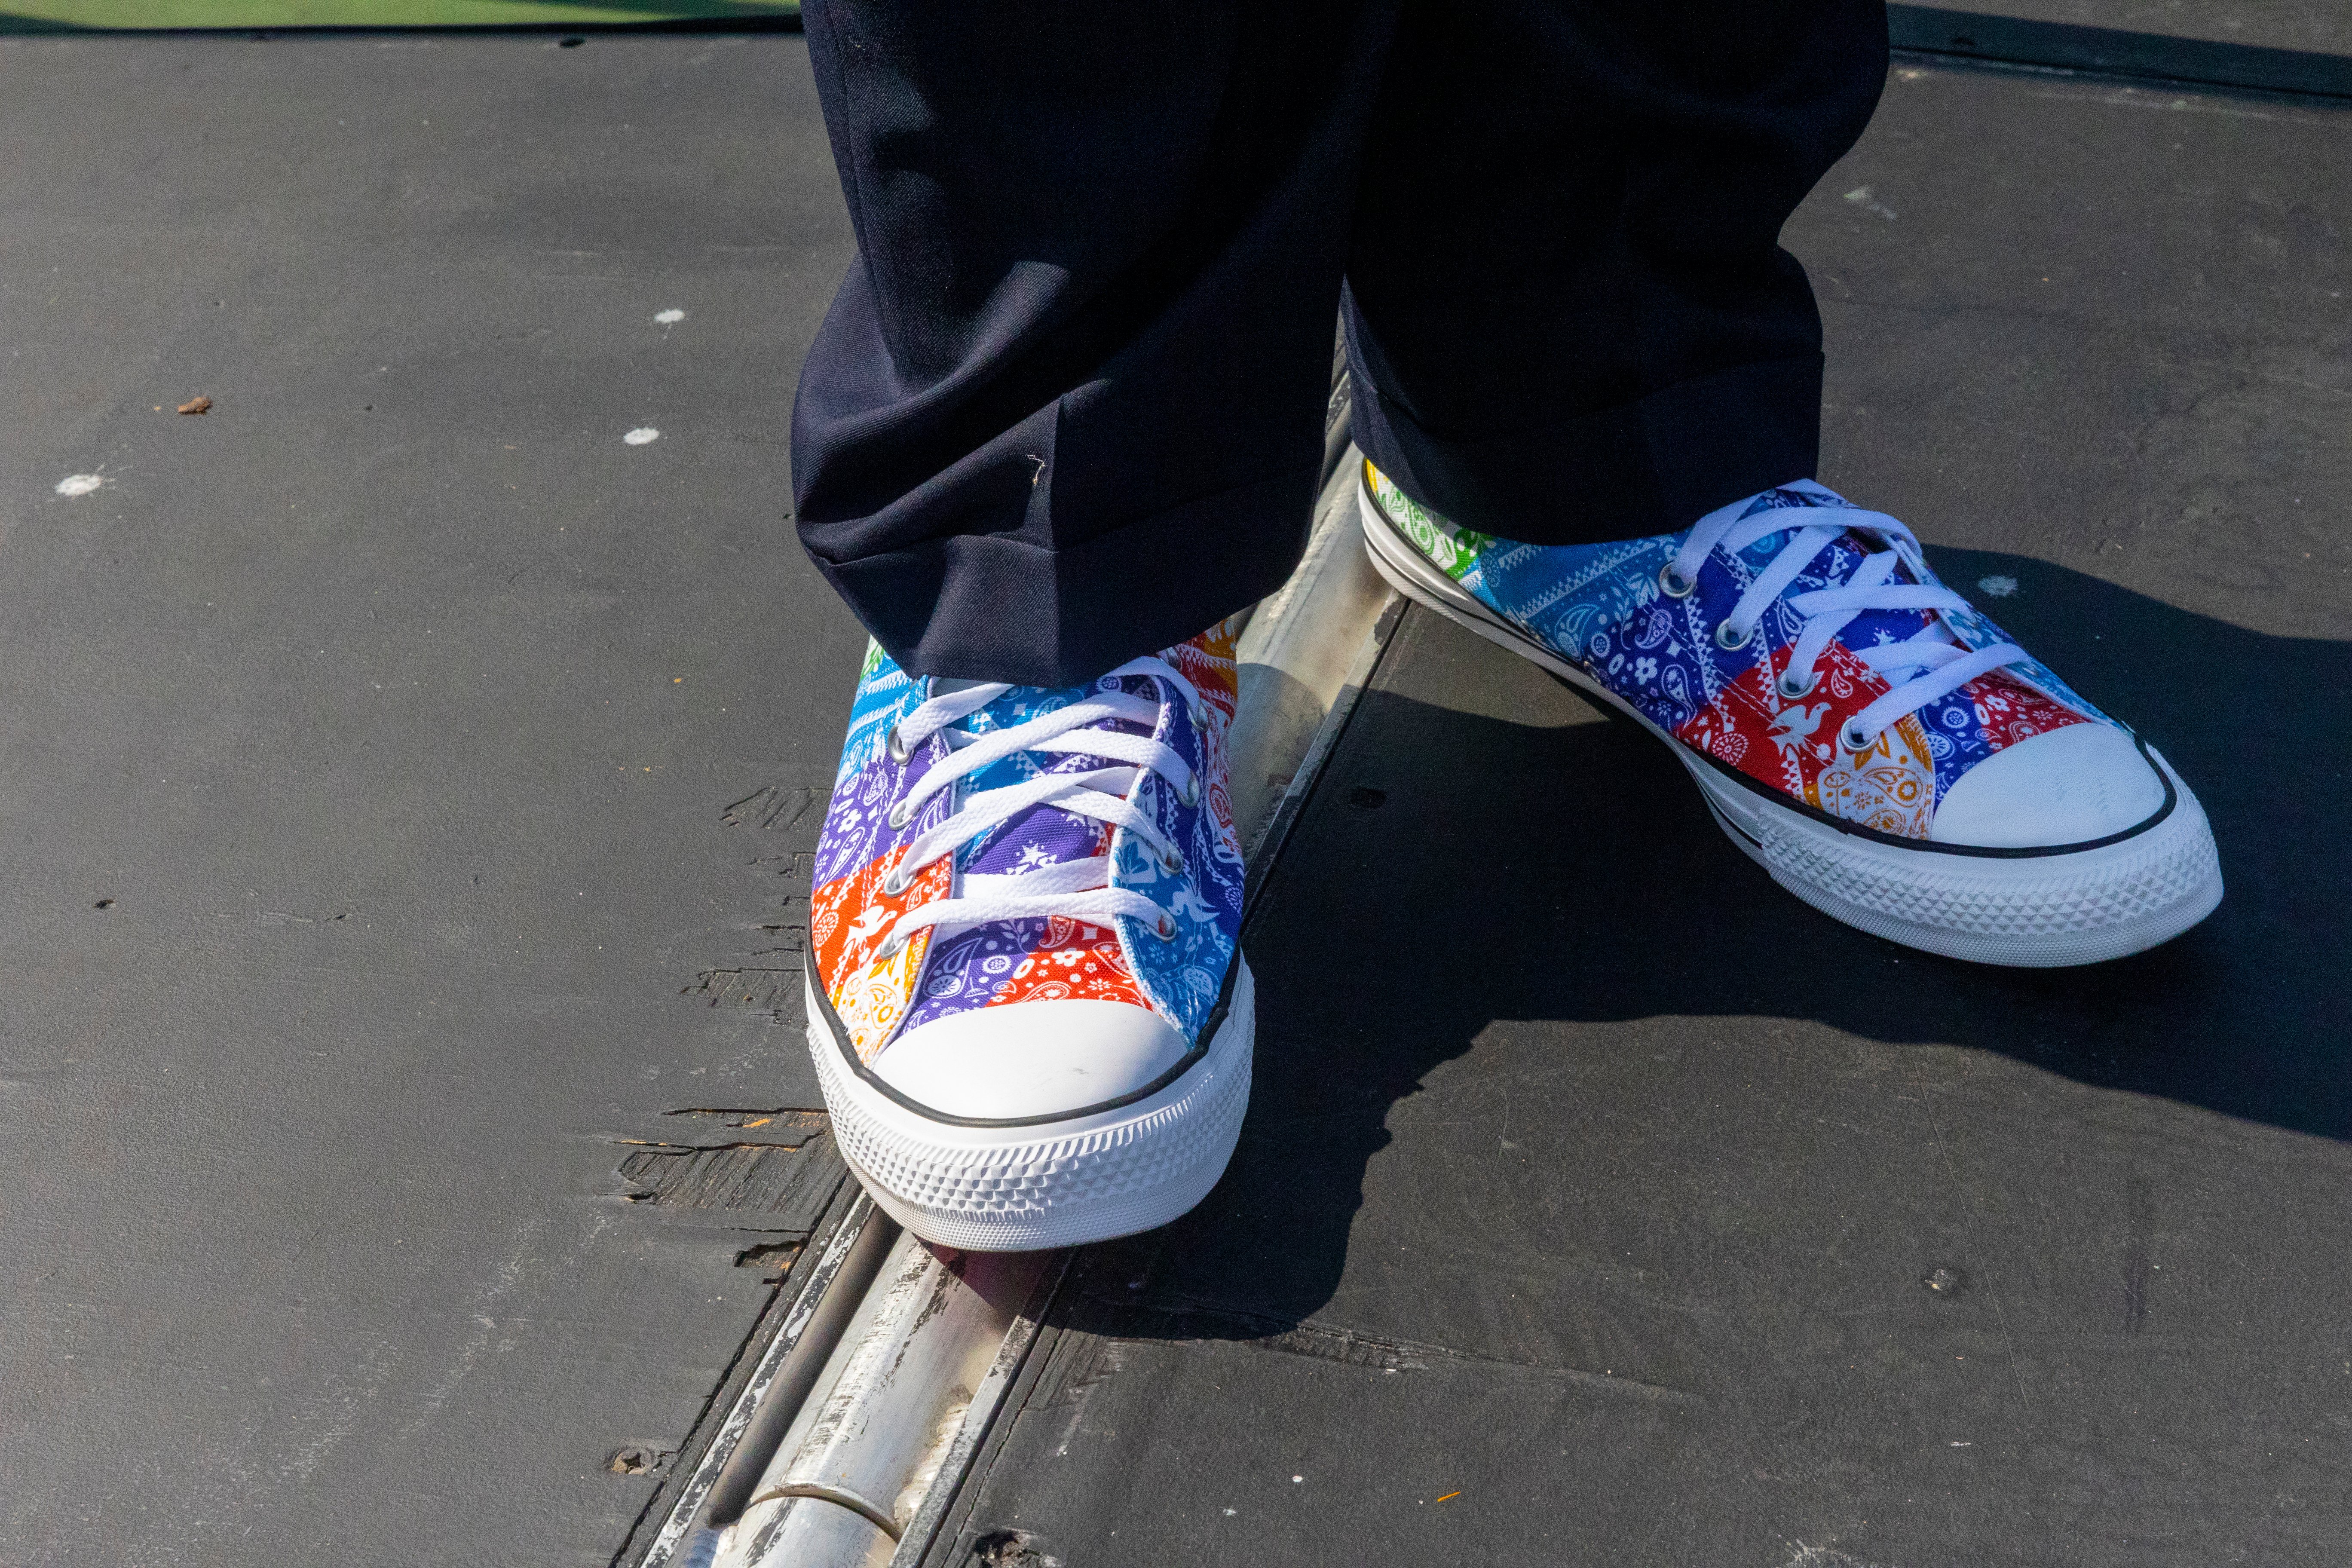 A close-up photo of the multicolored high-top shoes, Custom Chuck Taylor All Star Pride By You, as worn by Keith Curry.